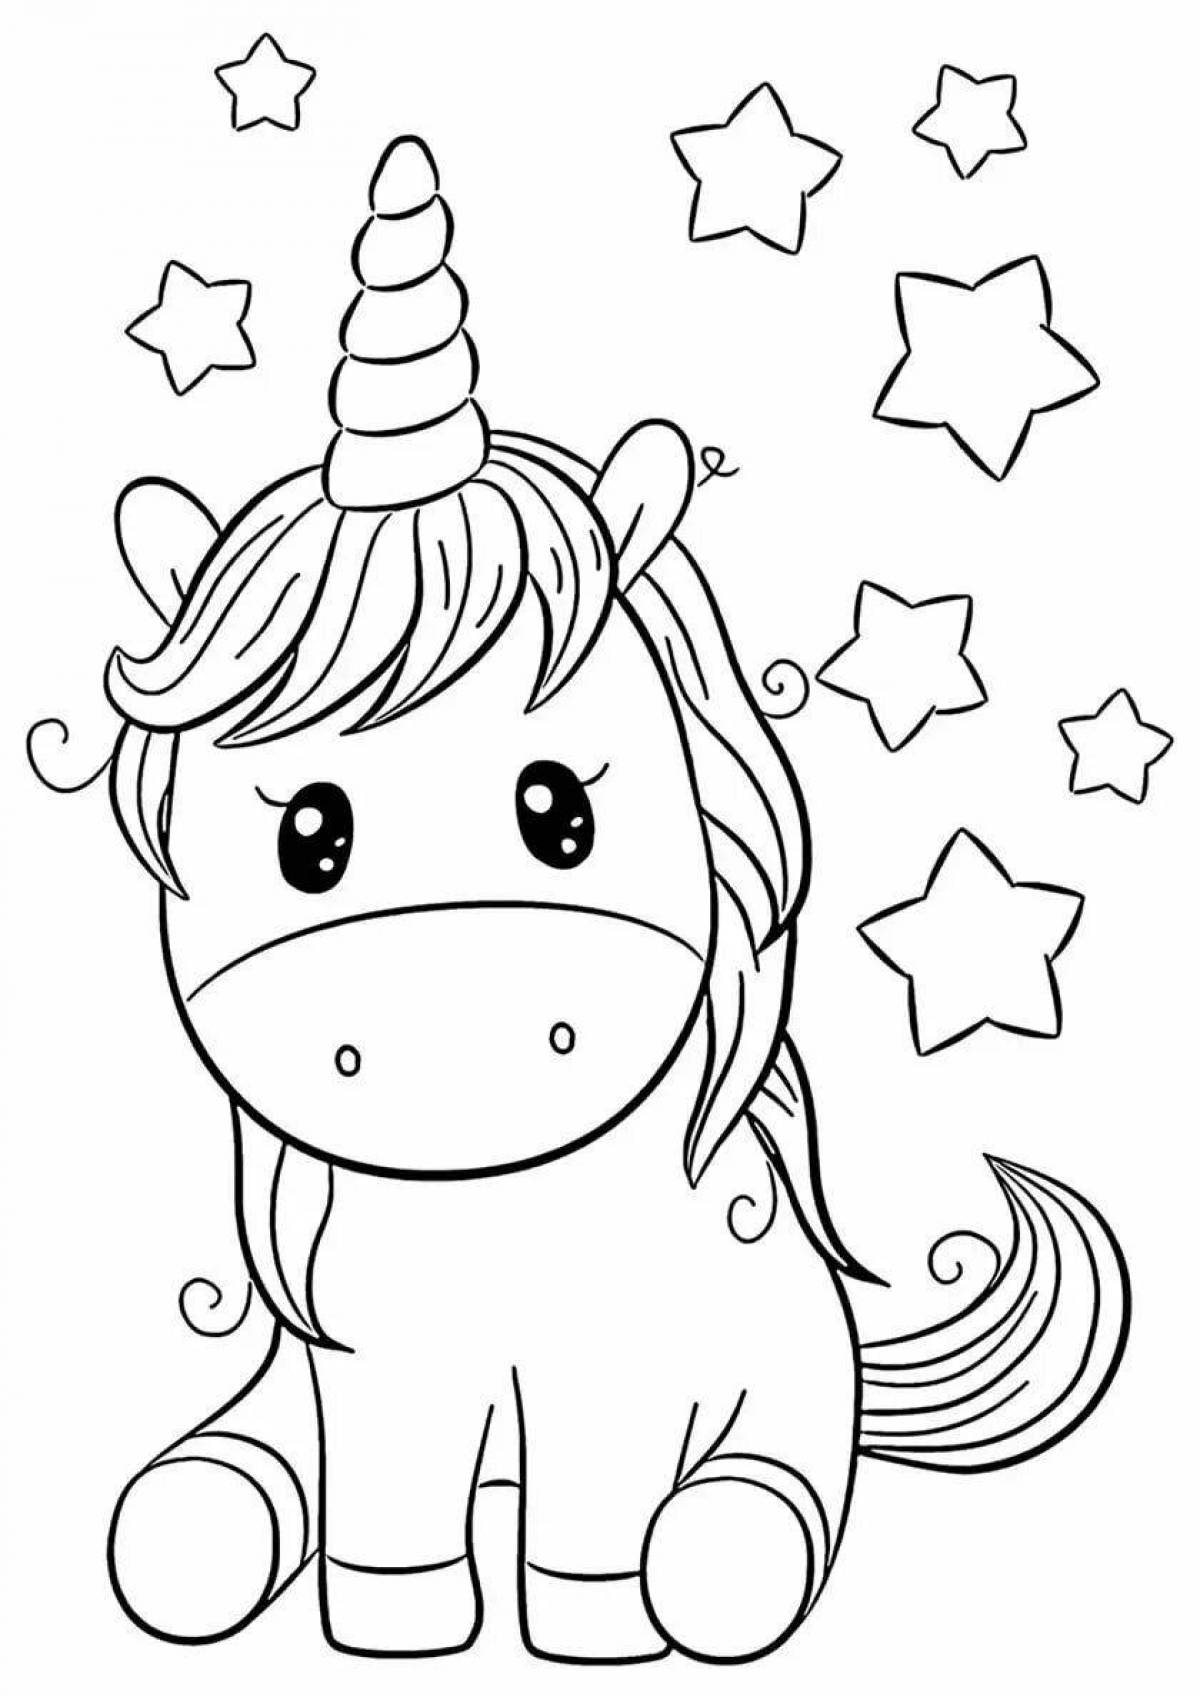 Charming unicorn coloring book for kids 5-6 years old